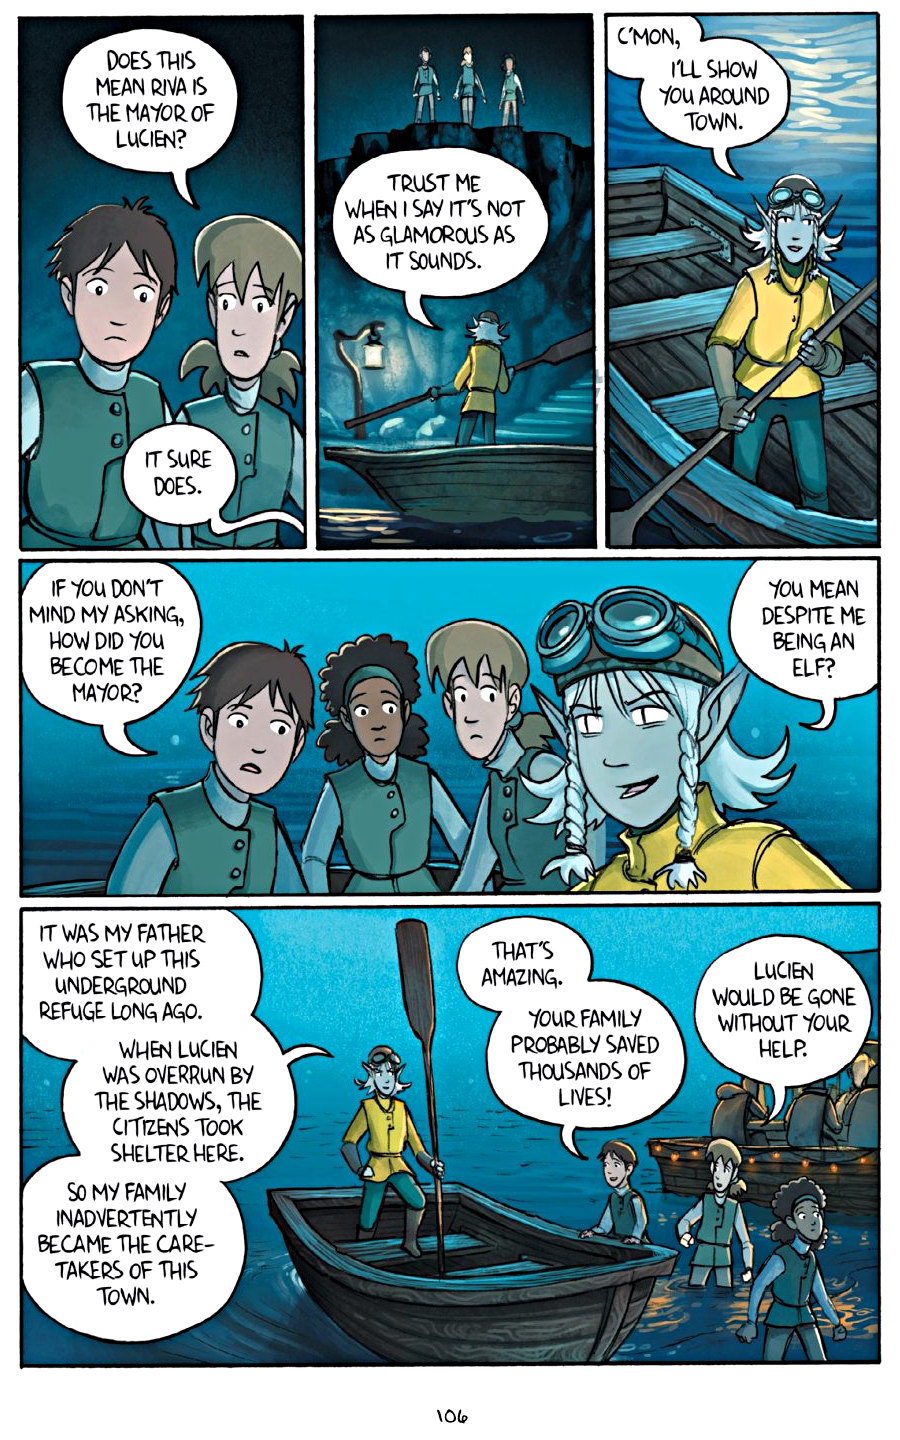 page 106 of amulet 6 escape from lucien graphic novel